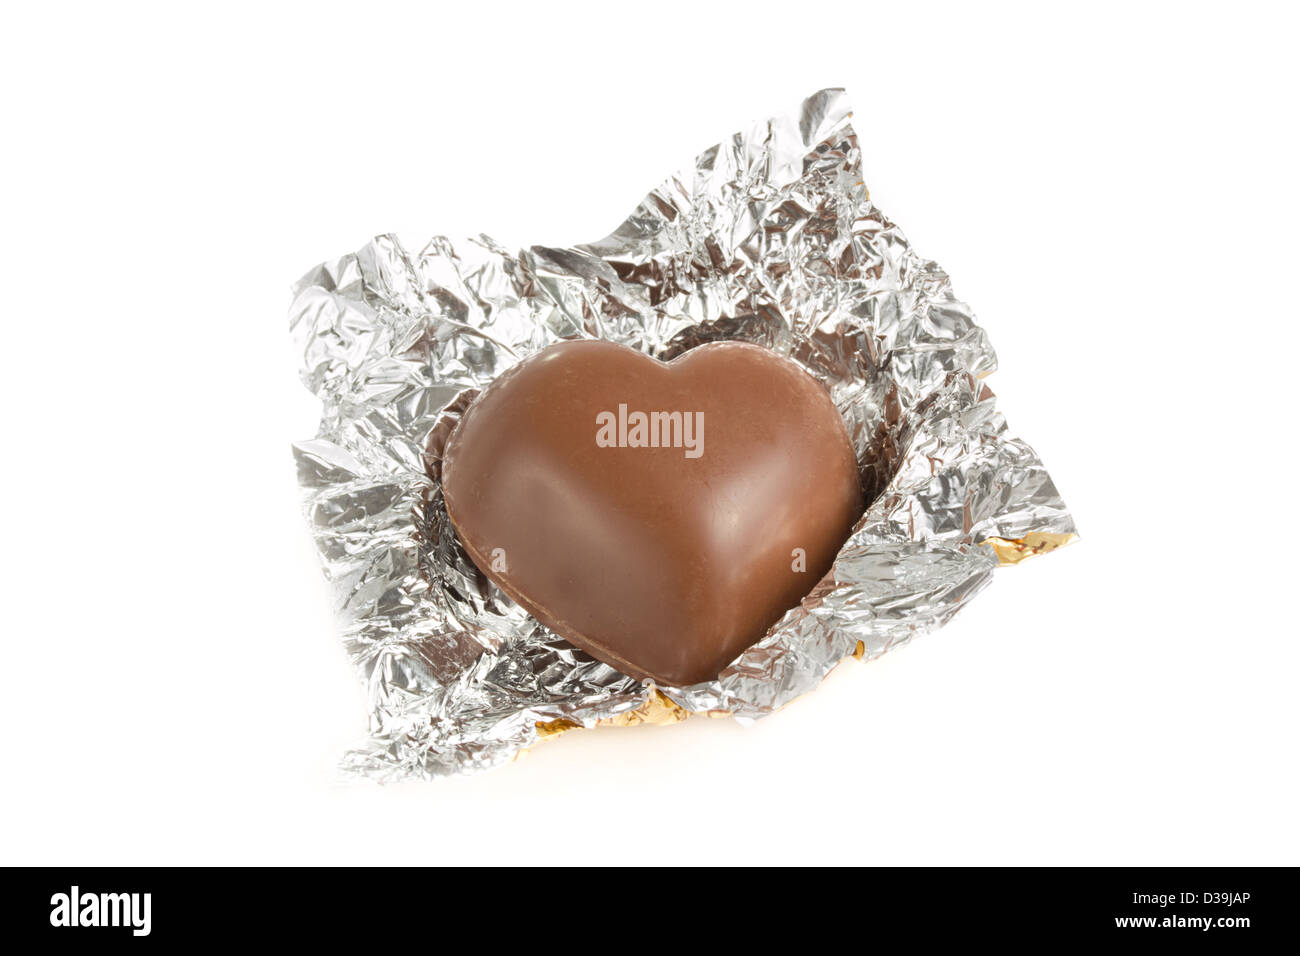 Heart shaped chocolate in a gold foil wrapper Stock Photo